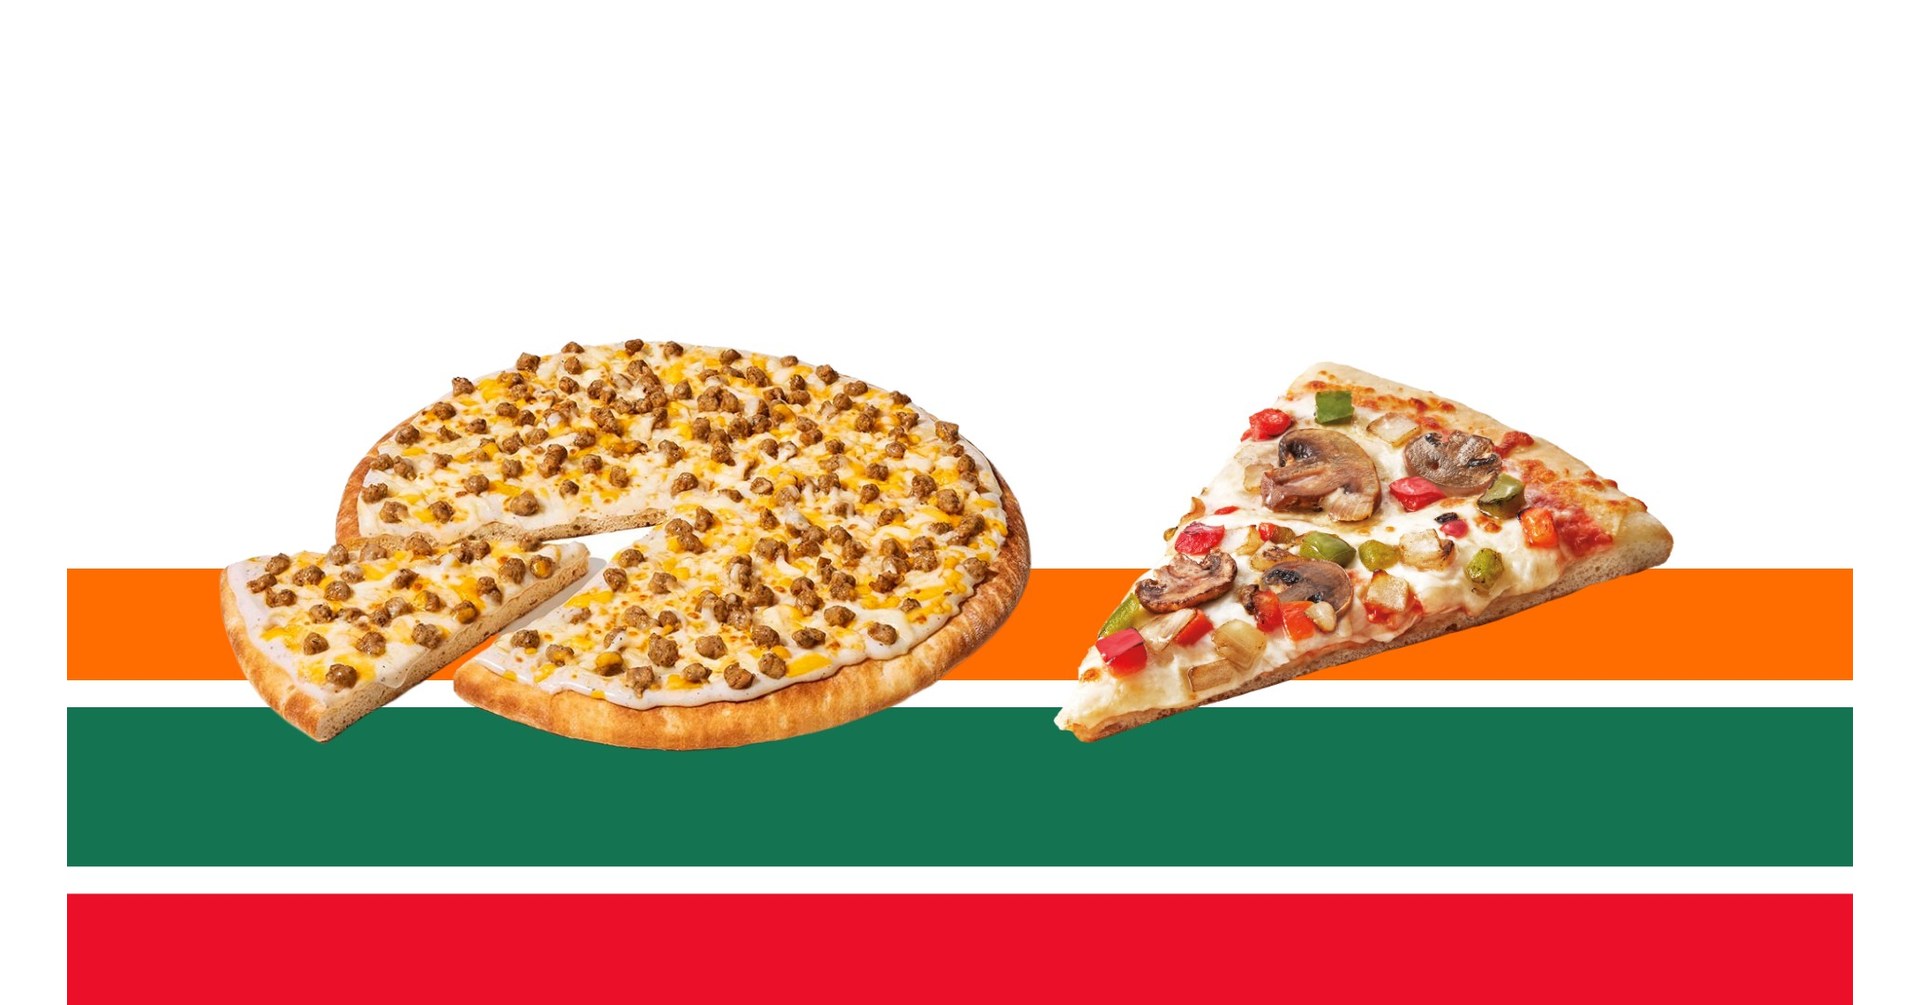 Pizza Pizza expands into Mexico